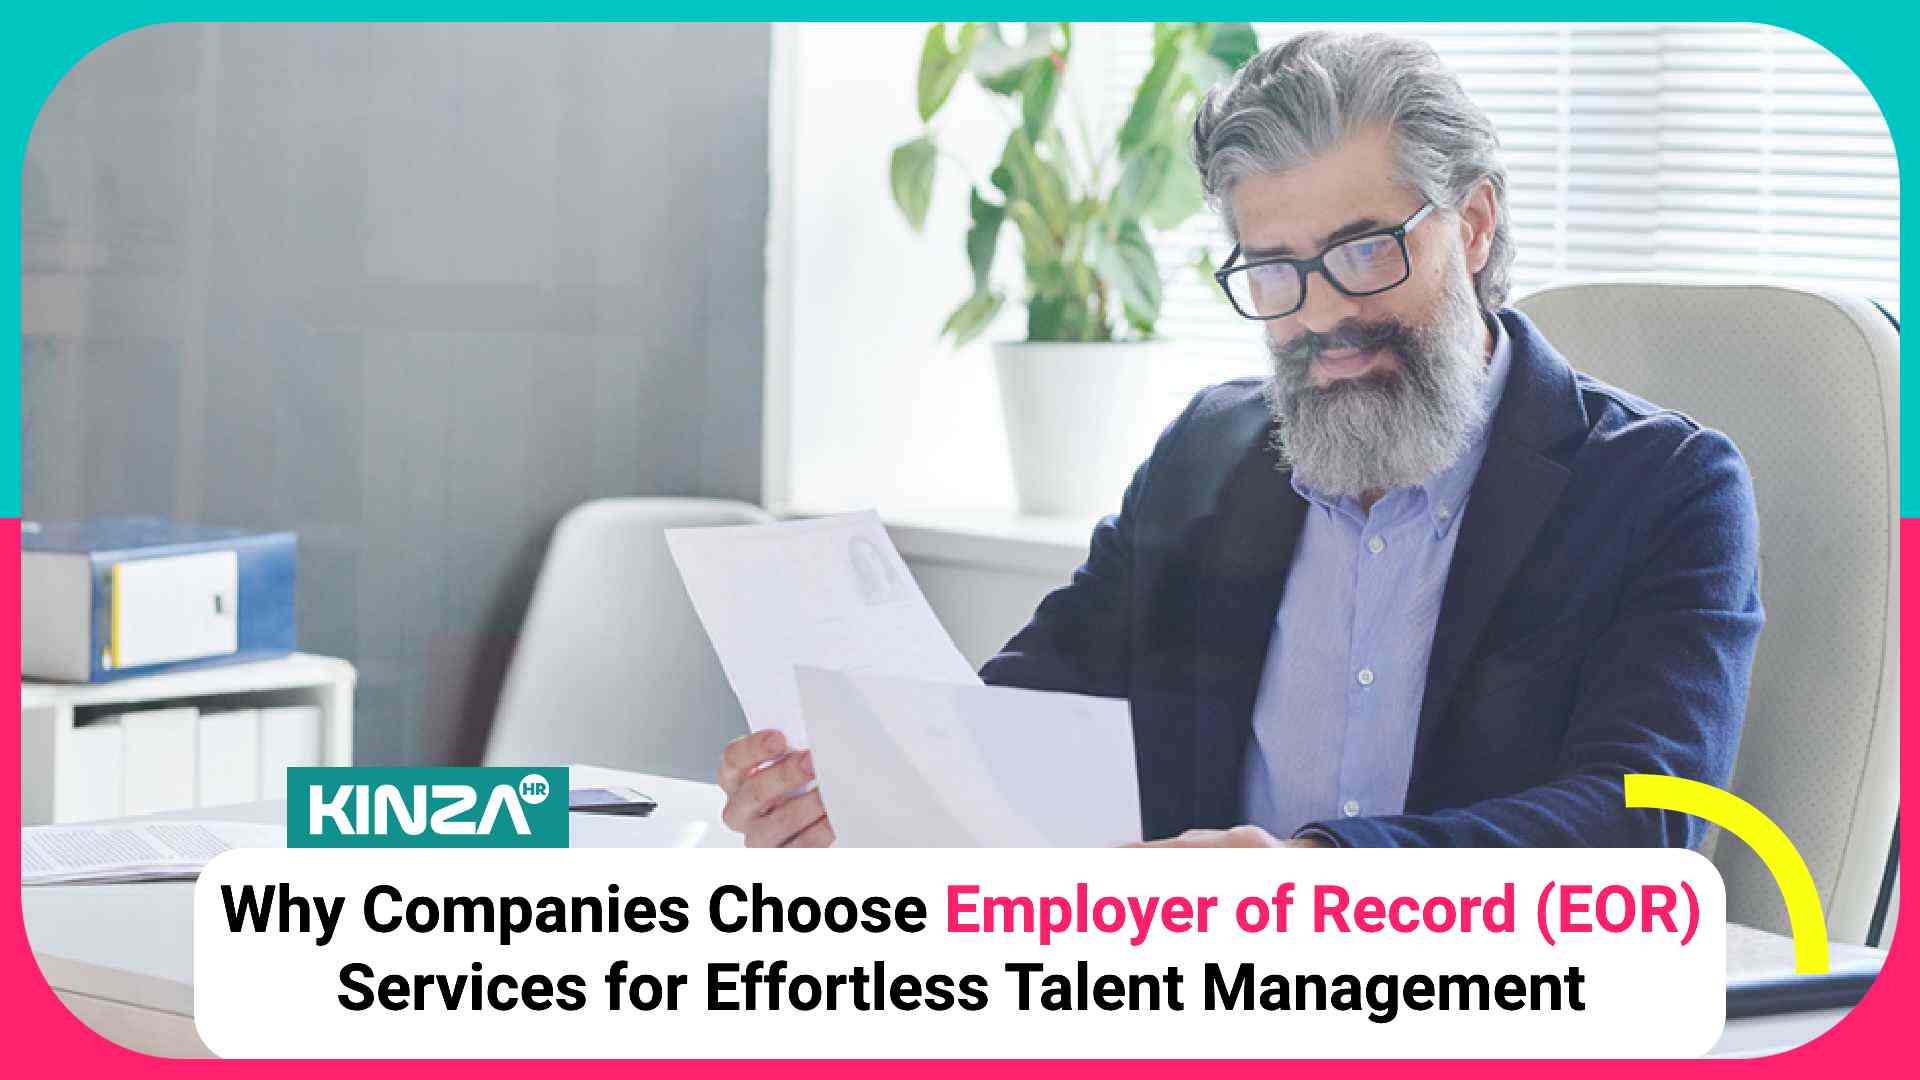 Why Companies Choose Employer of Record (EOR) Services for Effortless Talent Management